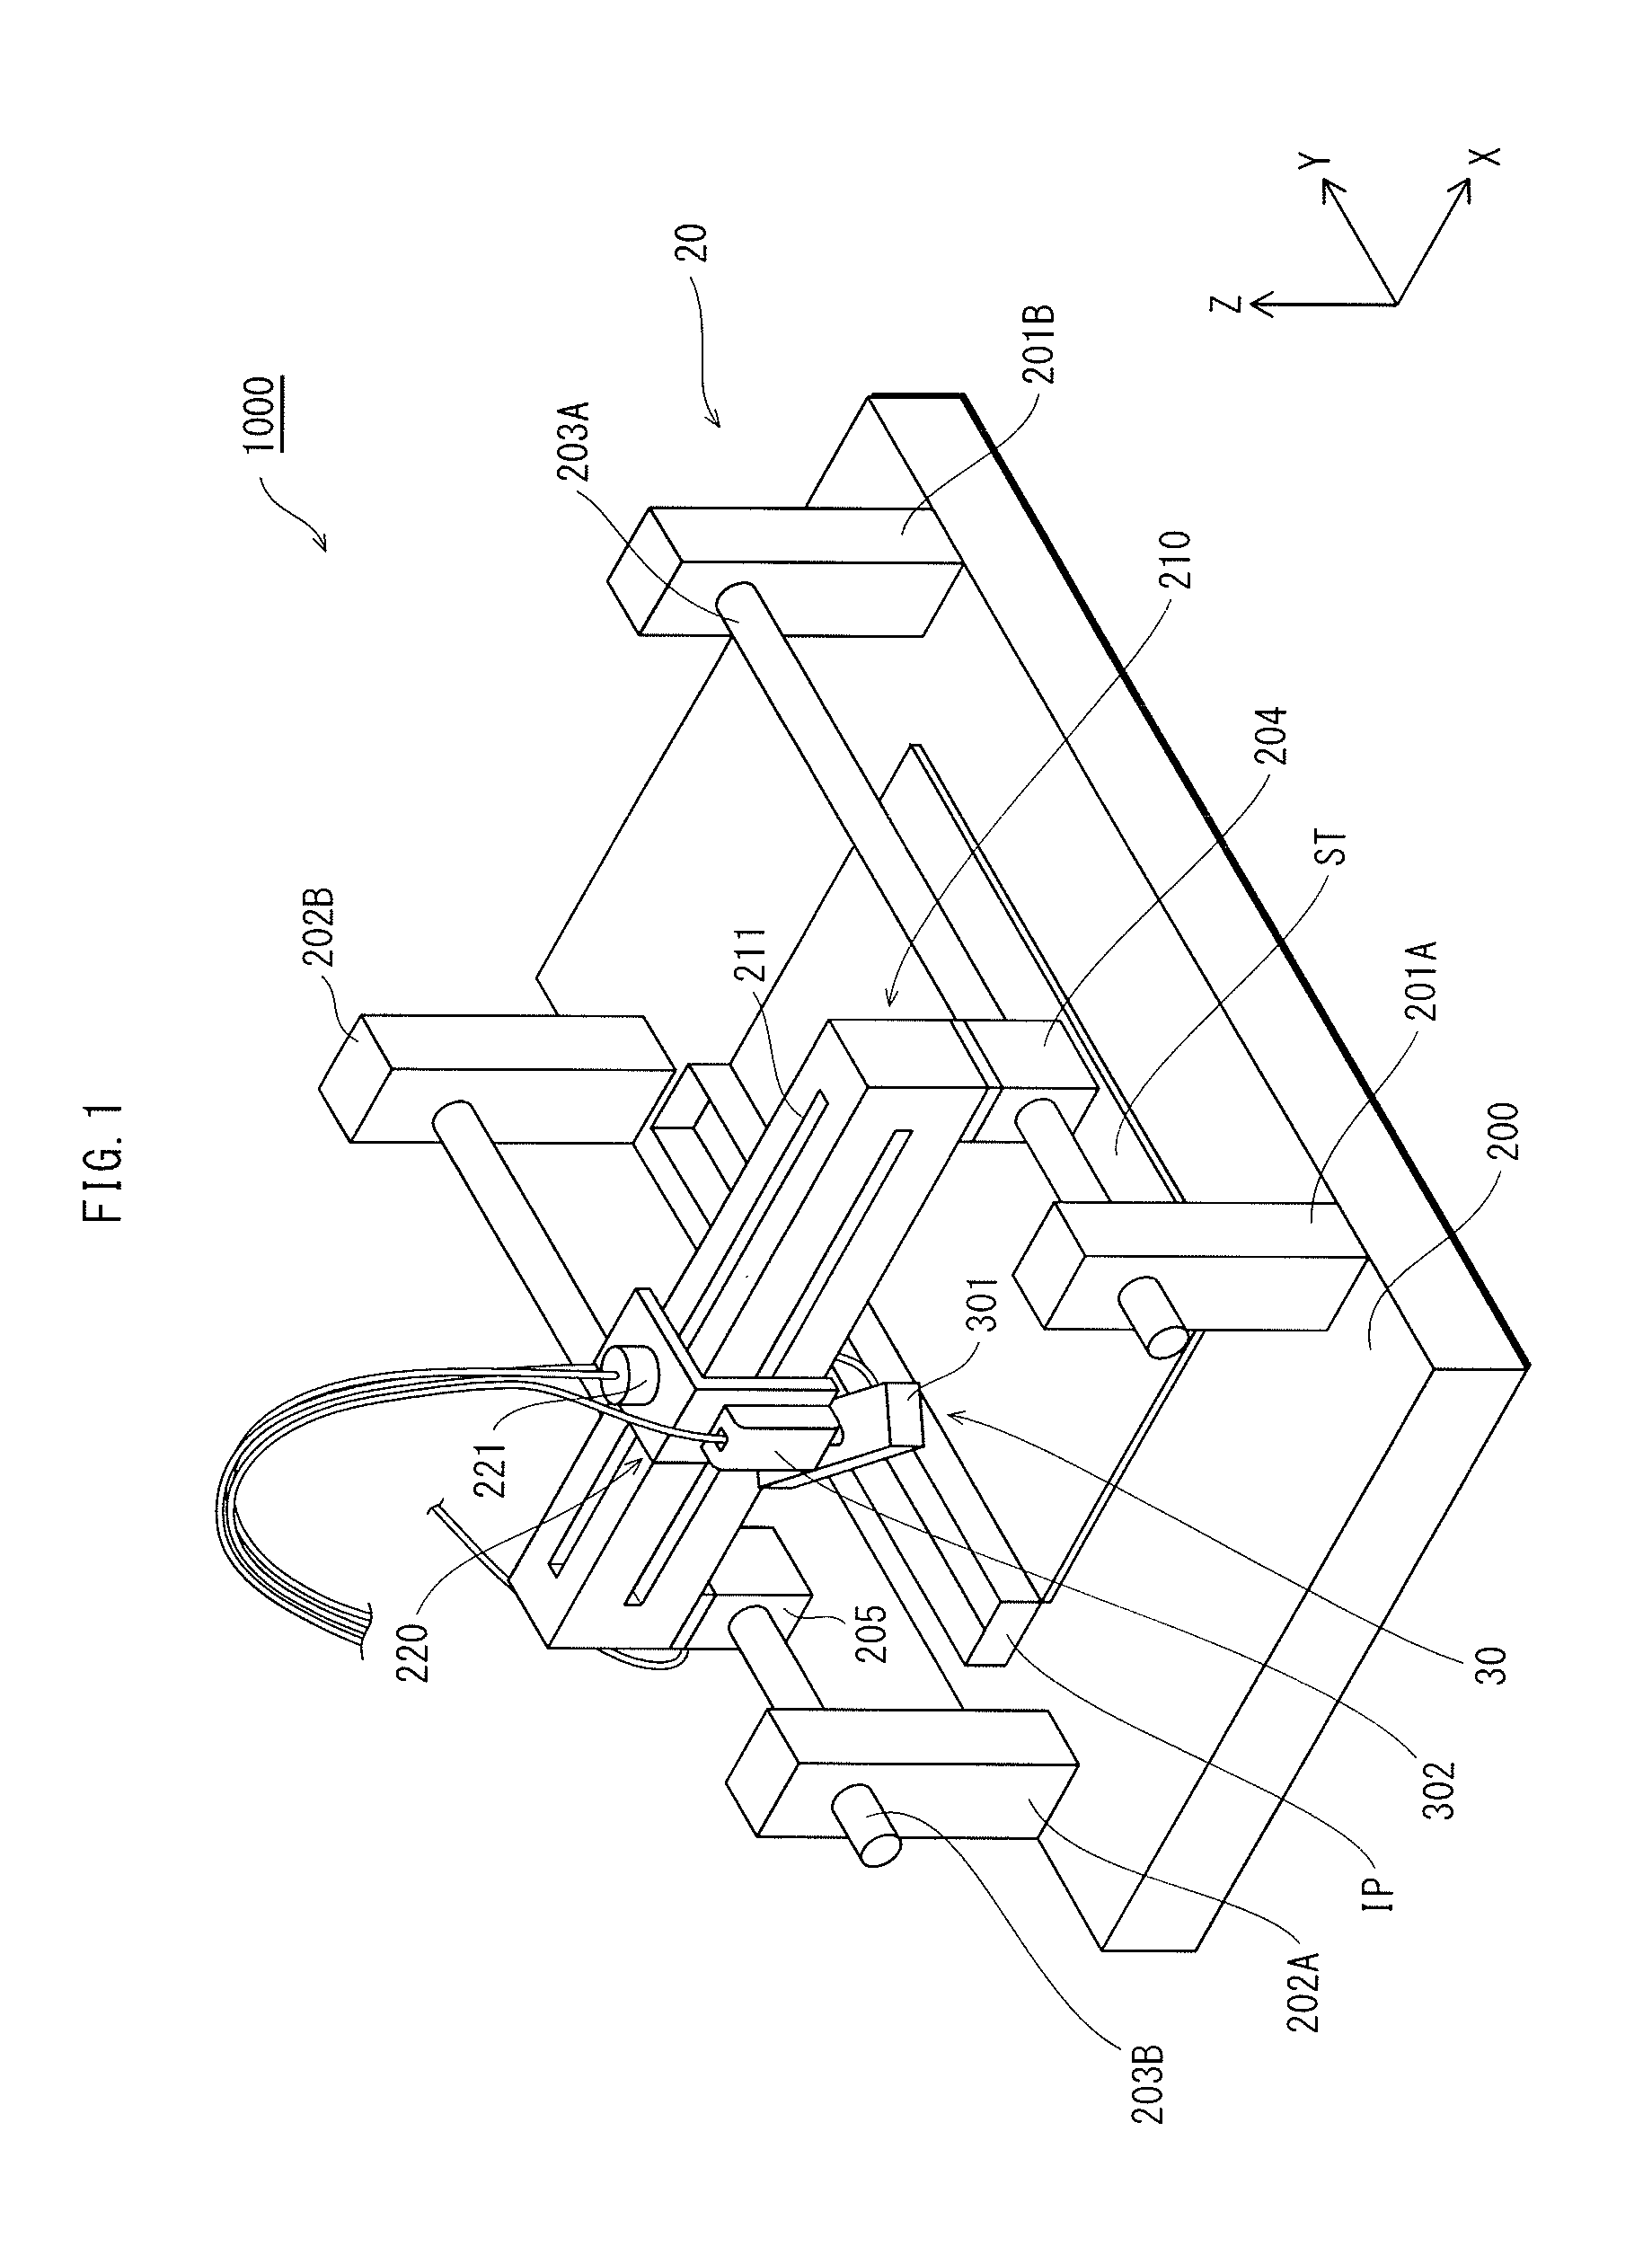 Inkjet apparatus and method for manufacturing organic el device